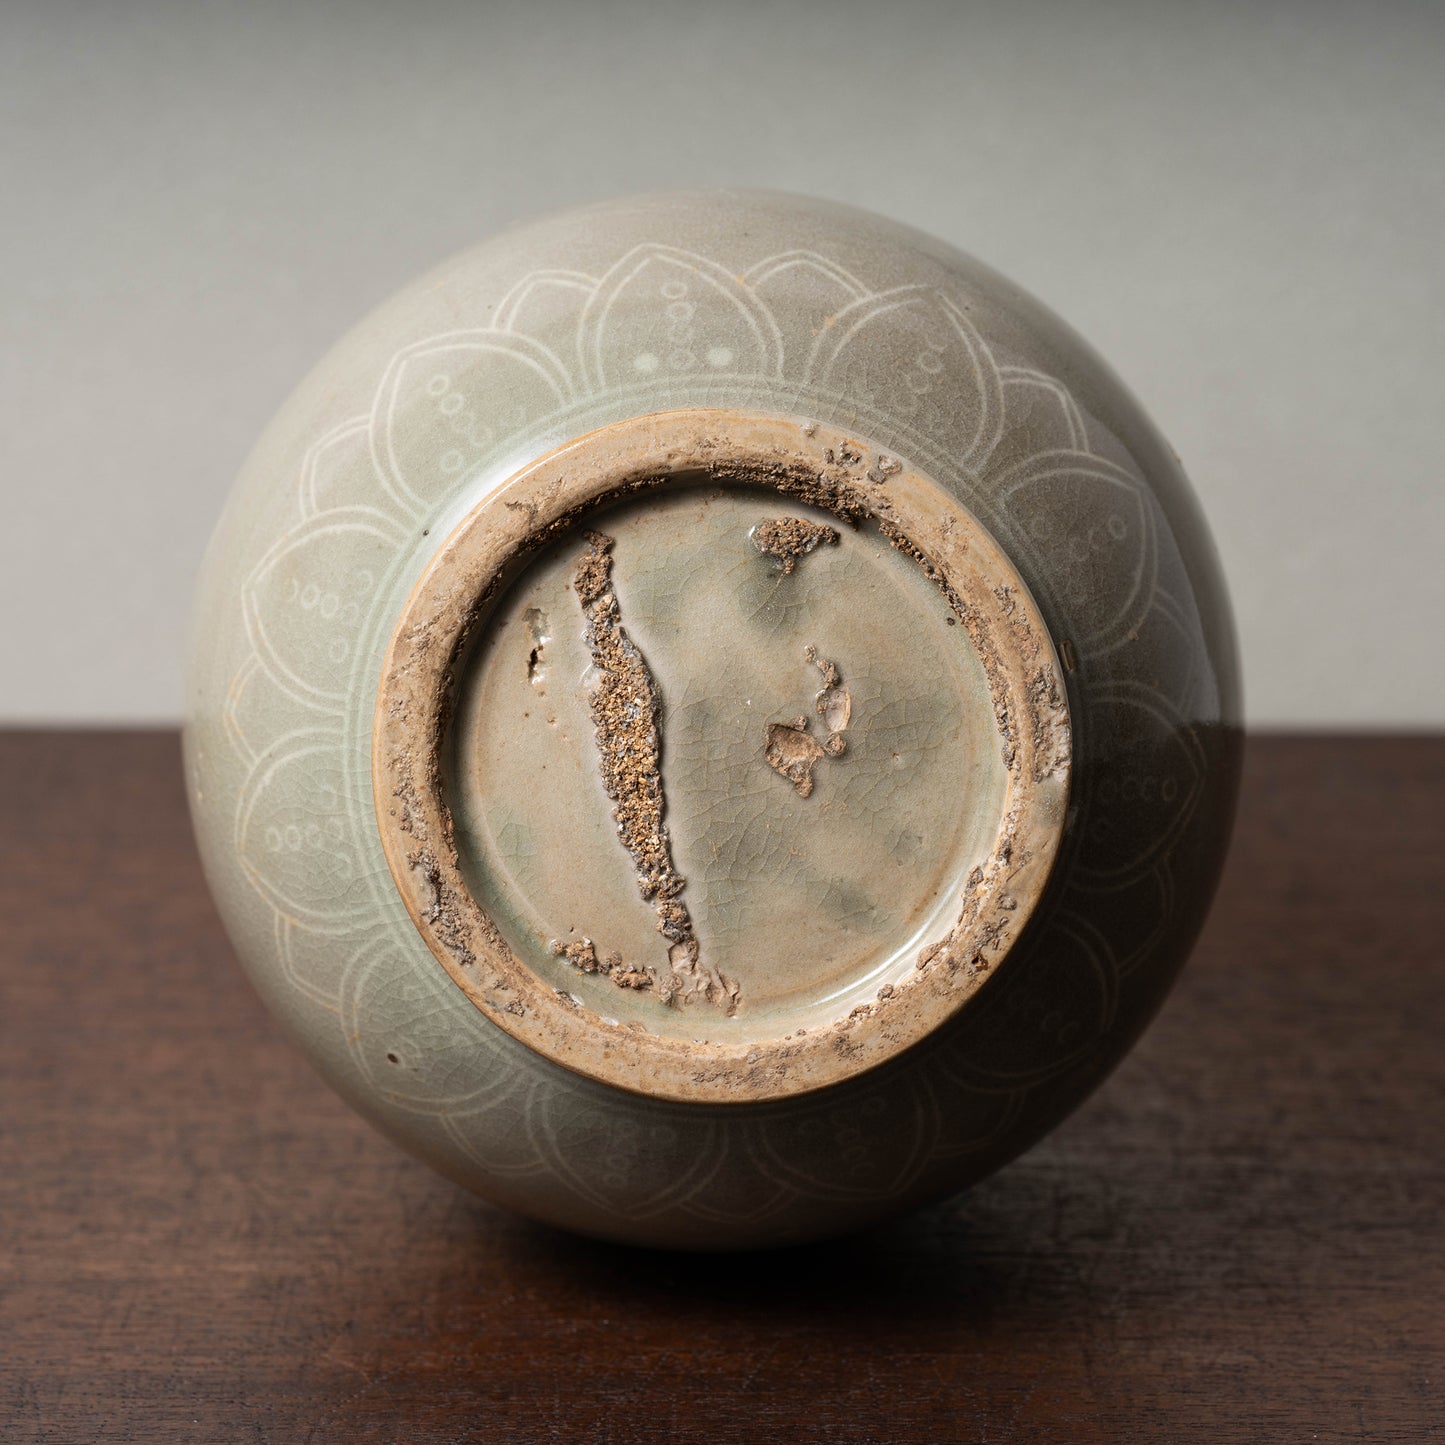 Goryeo Dynasty Celadon Calabash-Shape Bottle with Inlaid Cloud and Crane Design